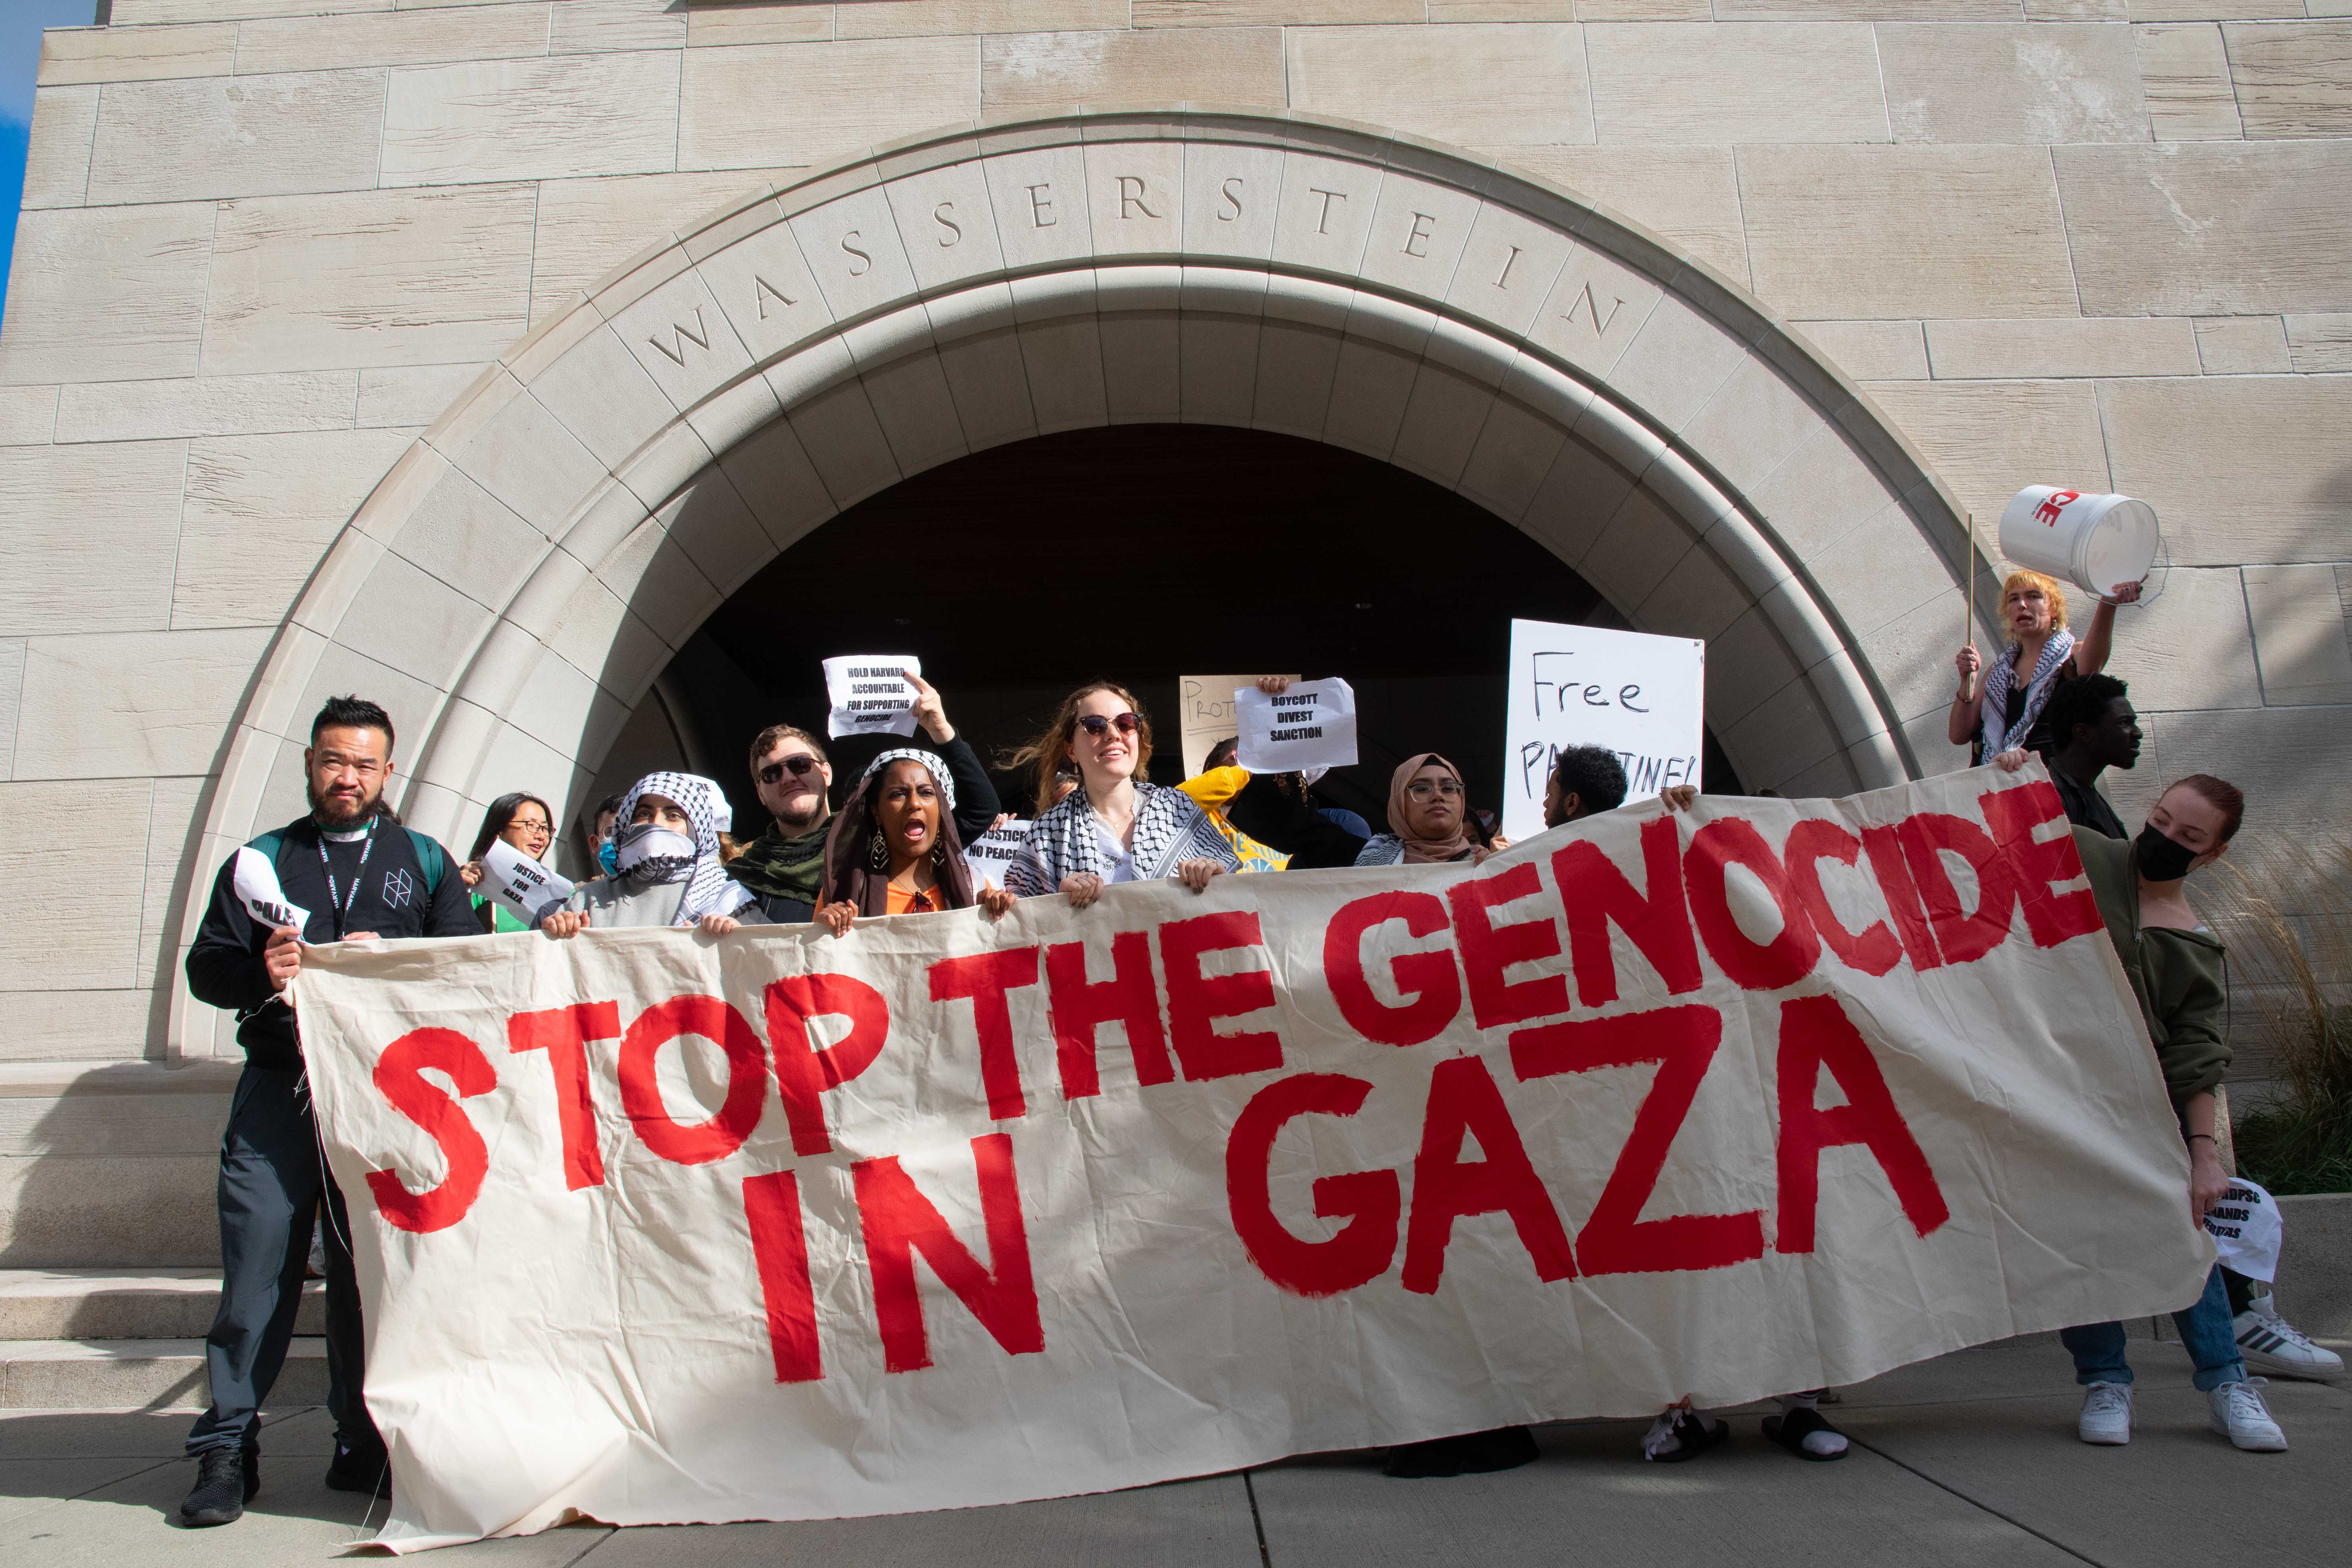 Protesters hold a banner reading “Stop the Genocide in Gaza” in front of Wasserstein Hall at Harvard Law School. Around 500 protesters supporting Palestine walked out of class and marched through multiple Harvard schools in the third protest on campus in support of Palestine following the start of the war in Israel and Gaza.